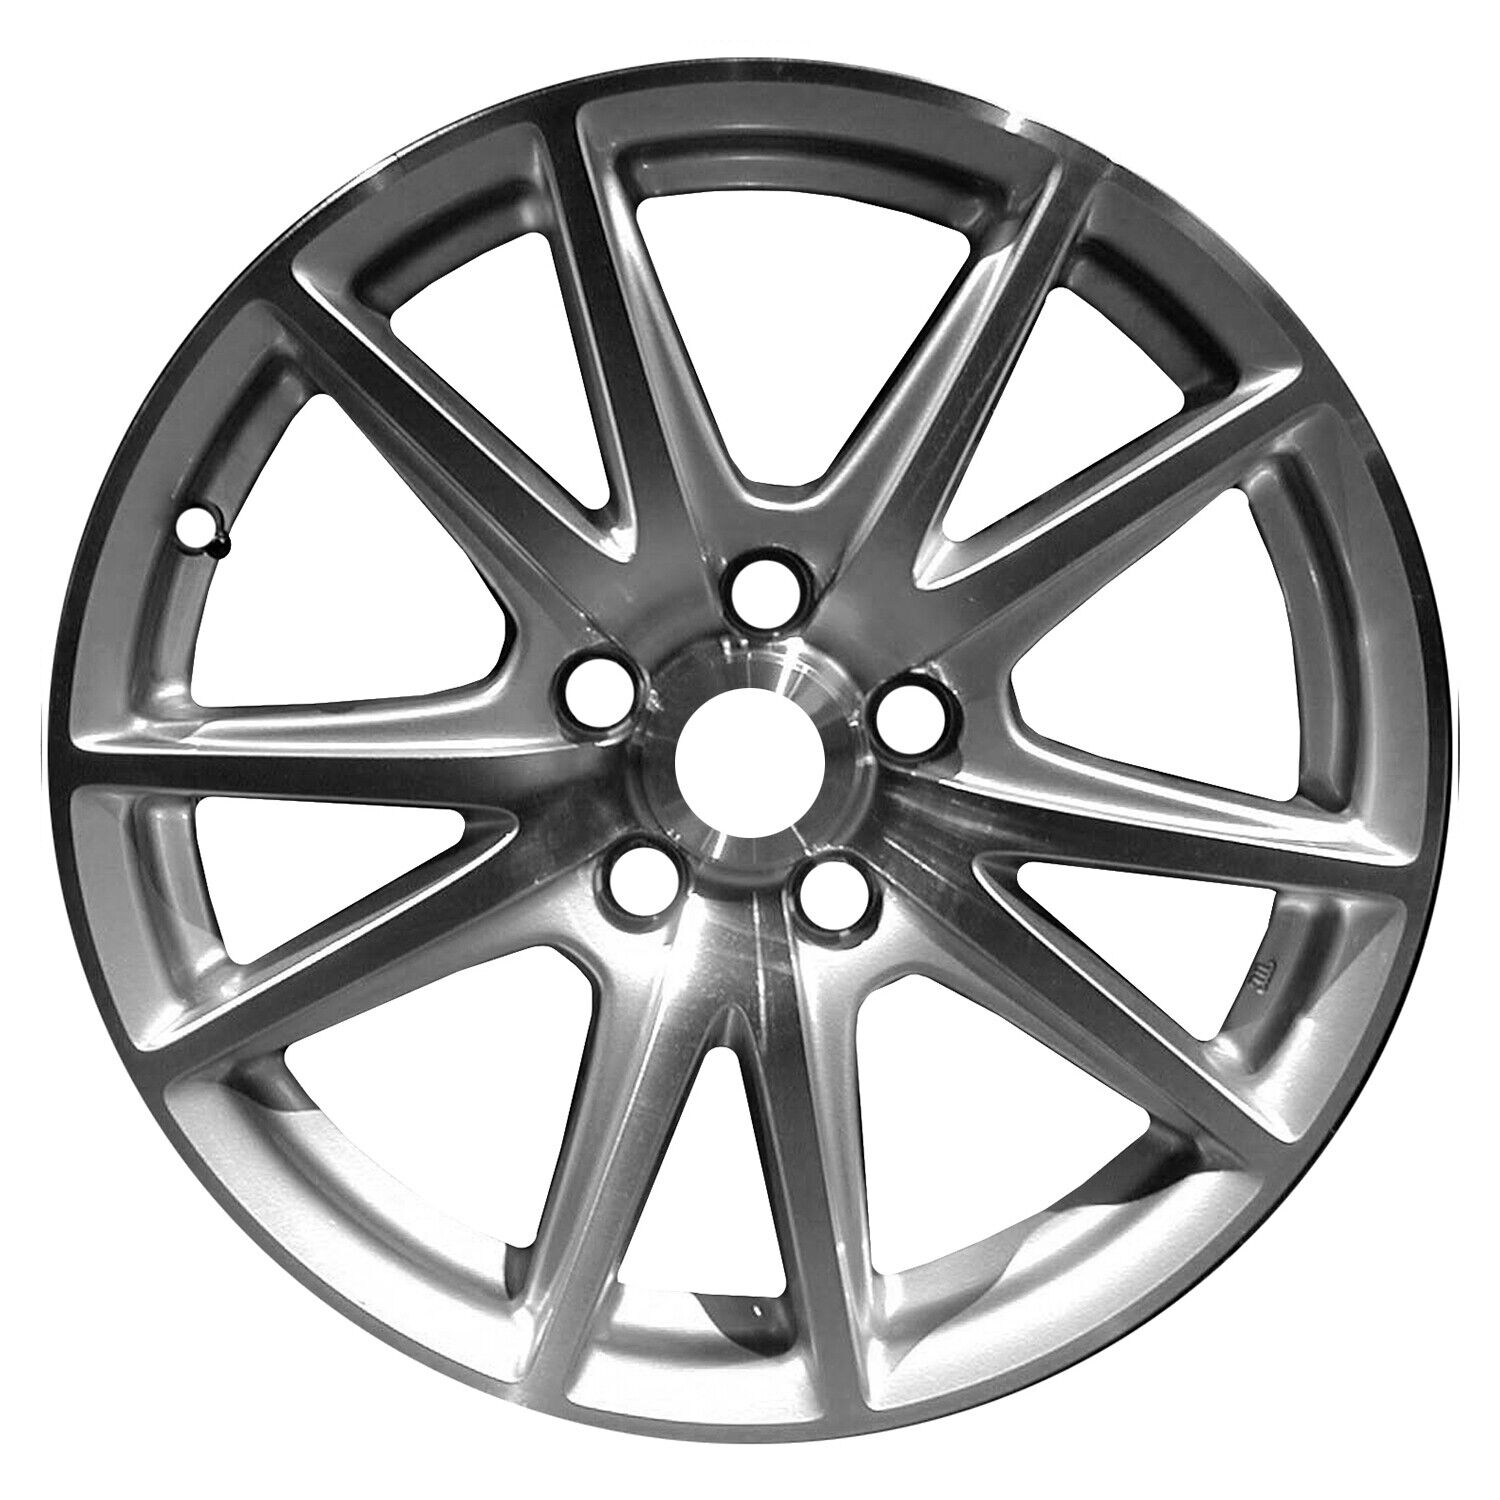 New 17x8.5 Machined and Painted Silver Wheel for 2004-2005 Honda S2000 560-63873